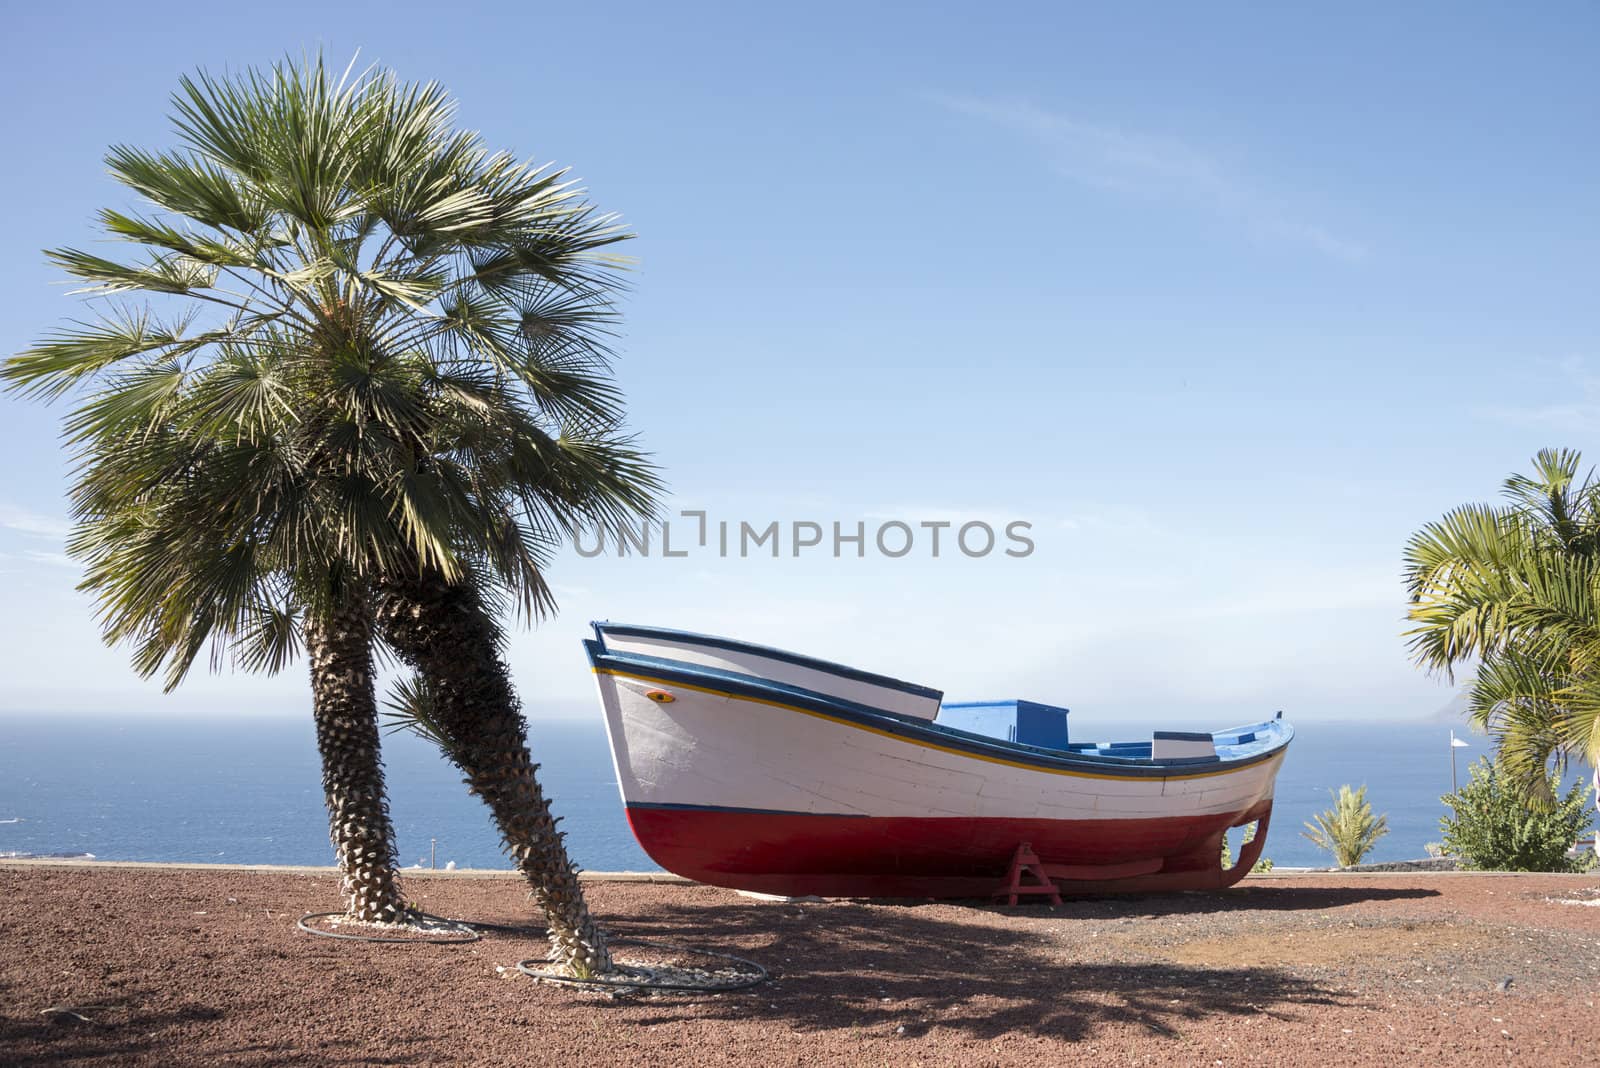 typical seane of a boat on the island tenerife